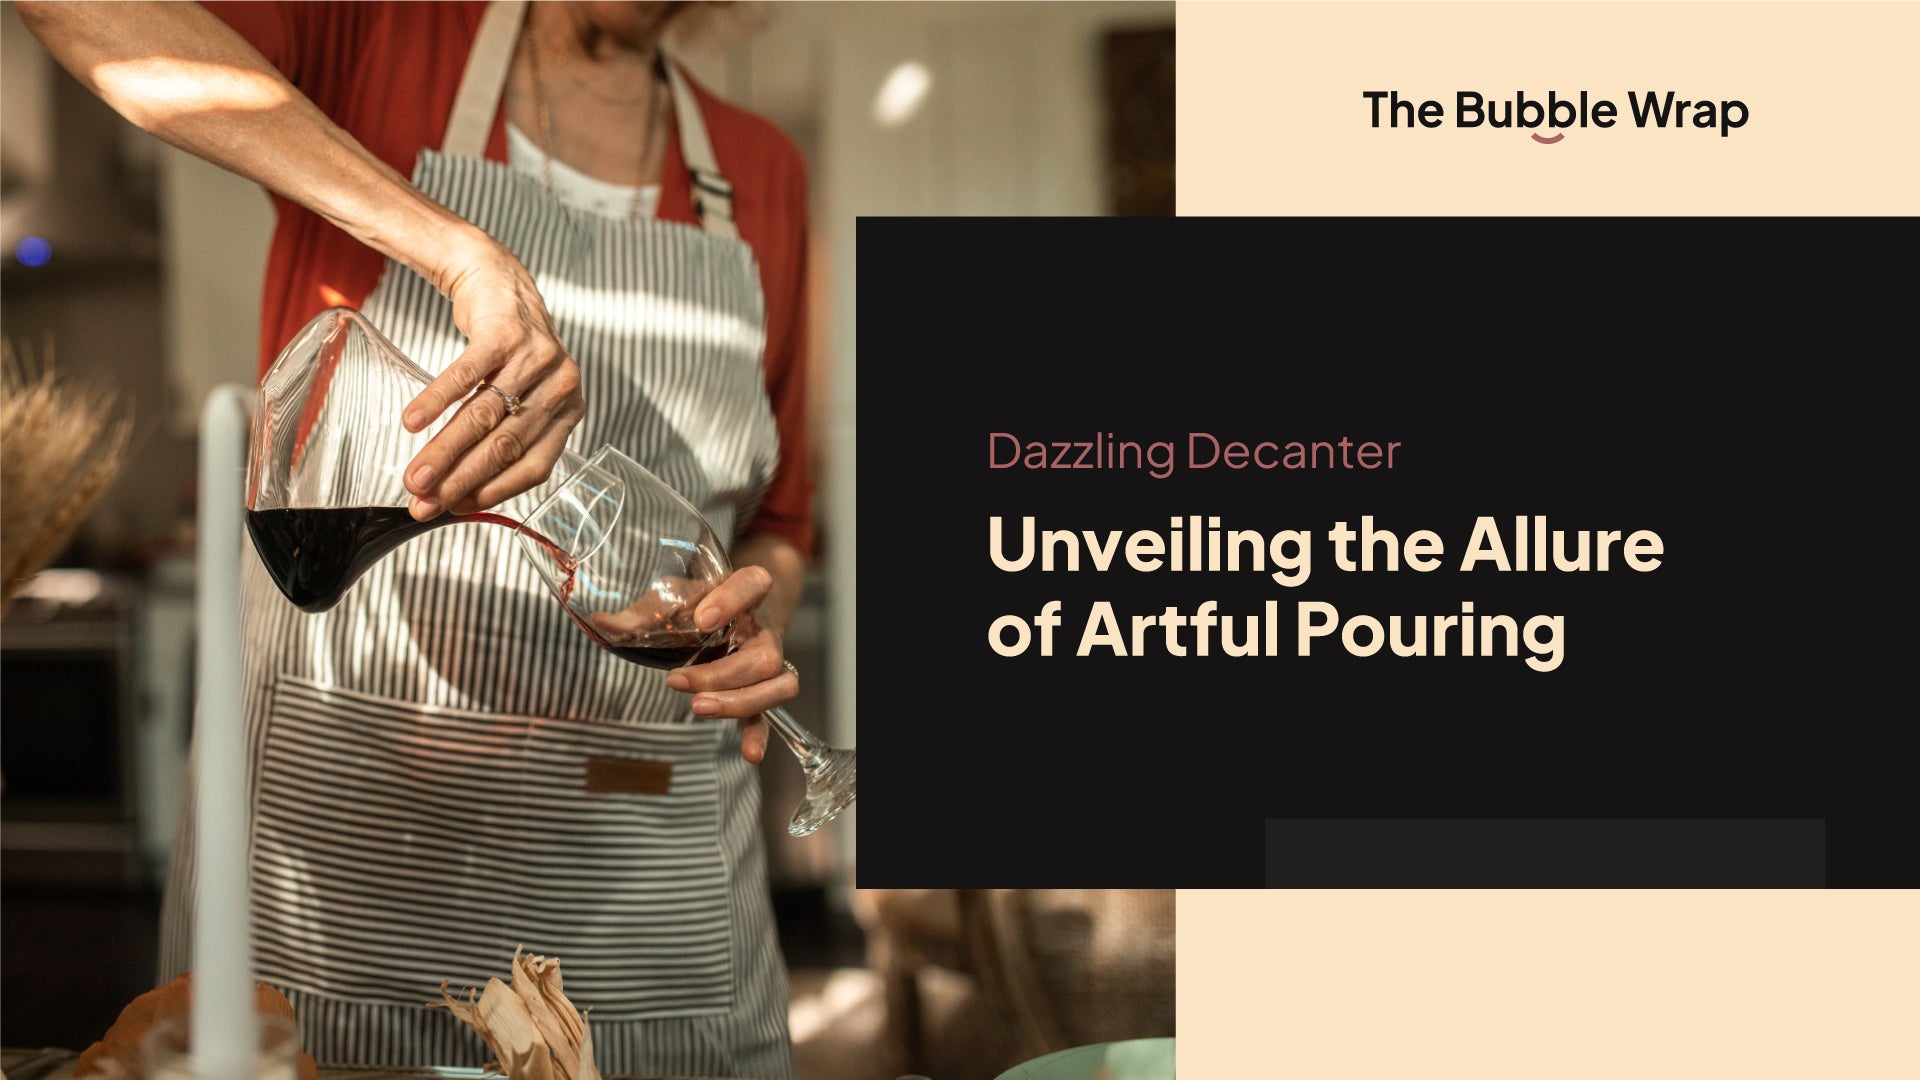 Dazzling Decanters: Unveiling the Allure of Artful Pouring